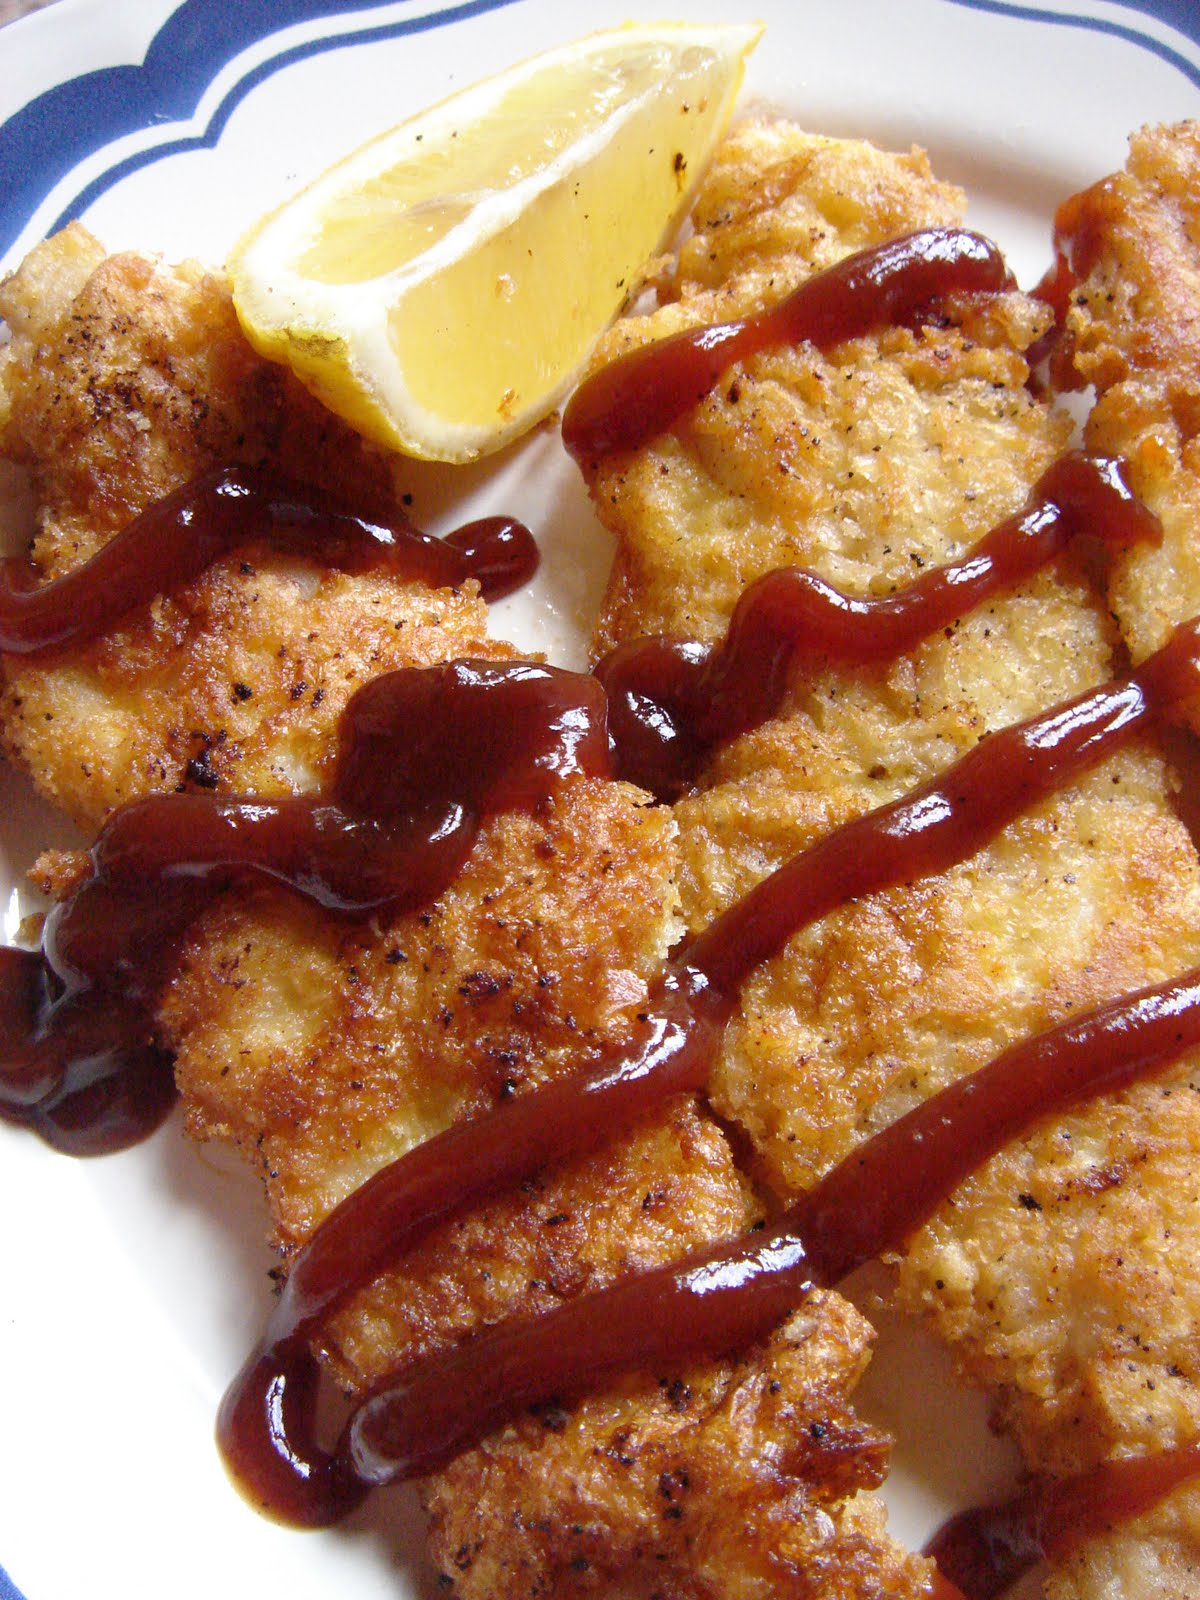 East meets West: Breaded Sole Fillets with Tonkatsu Sauce